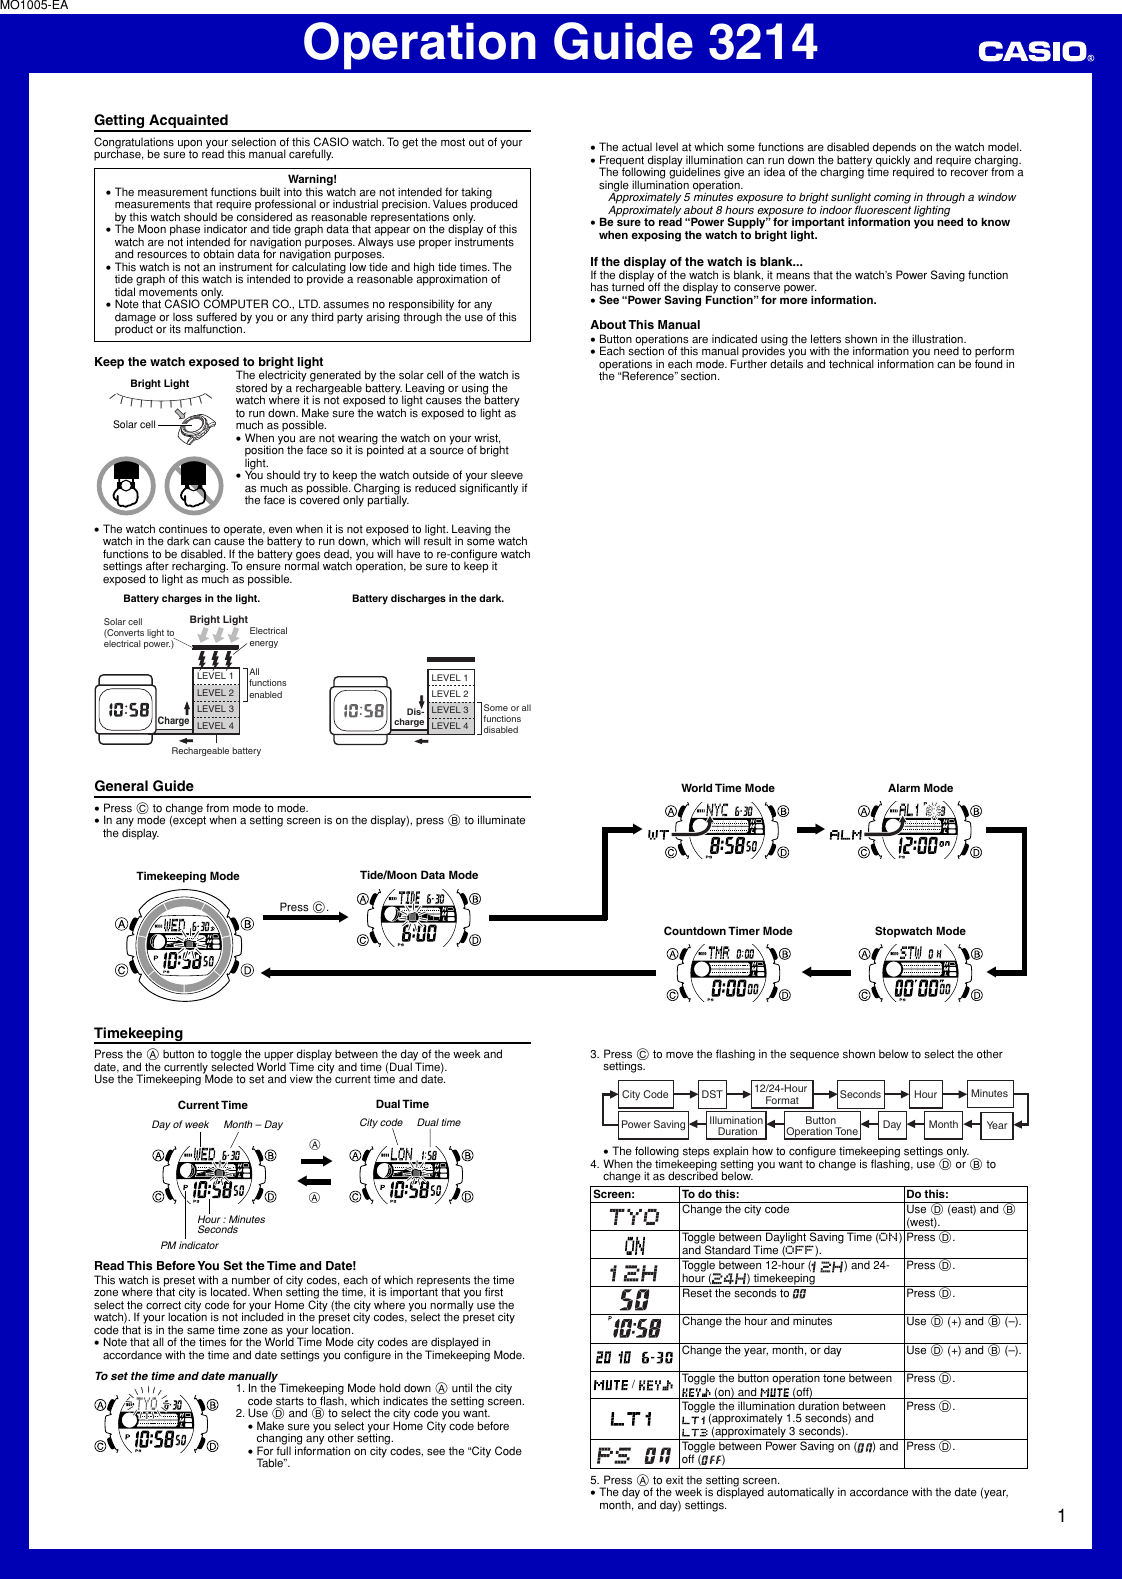 Page 1 of 5 - Casio Casio-Ws210H-1Av-Operation-Manual- QW-3214  Casio-ws210h-1av-operation-manual